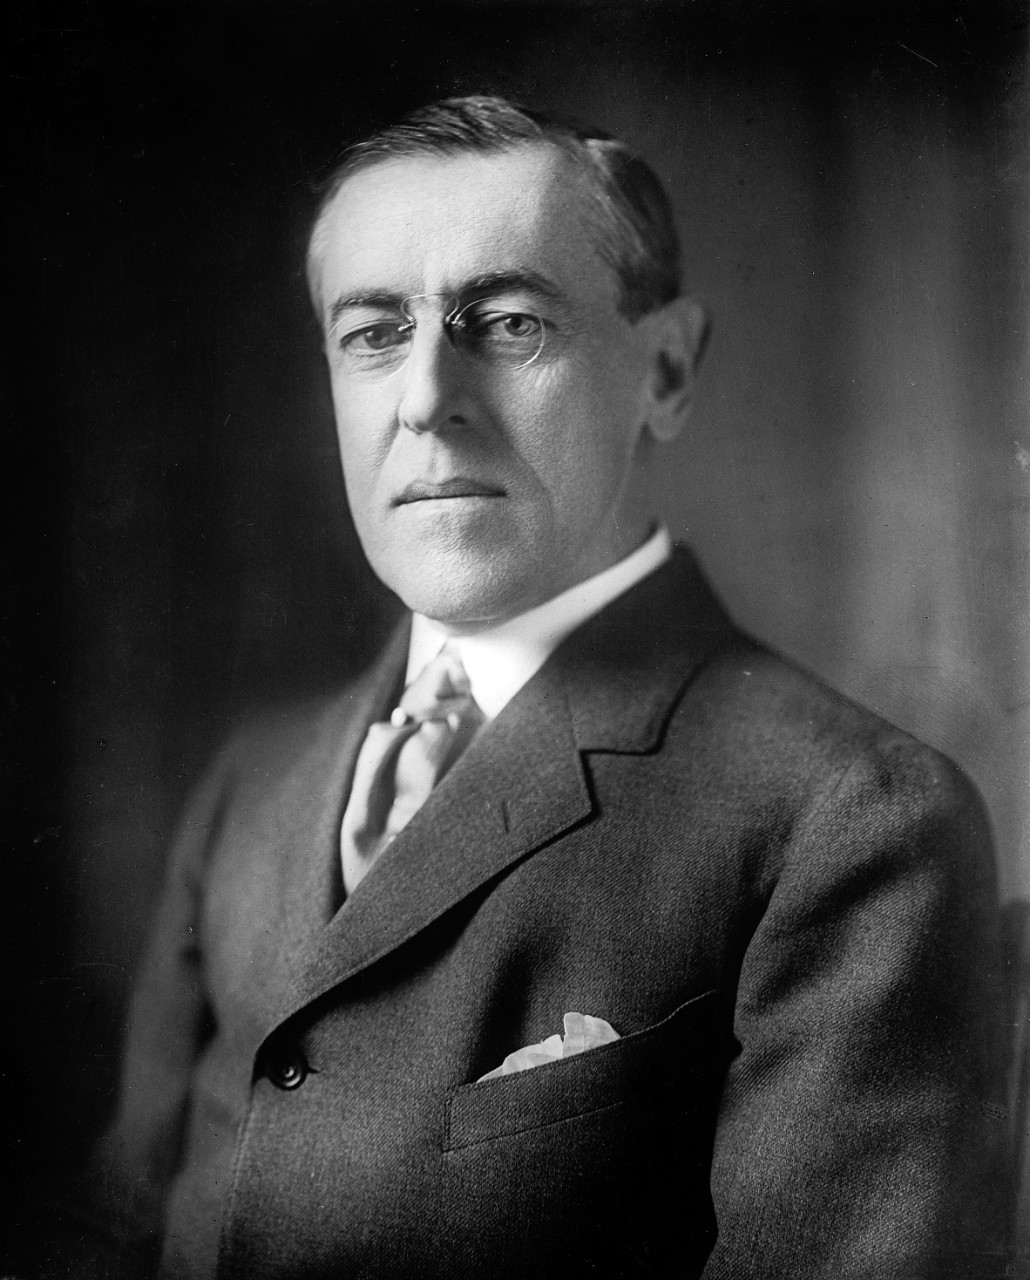 A portrait of Woodrow Wilson who was the U.S. president during World War One.